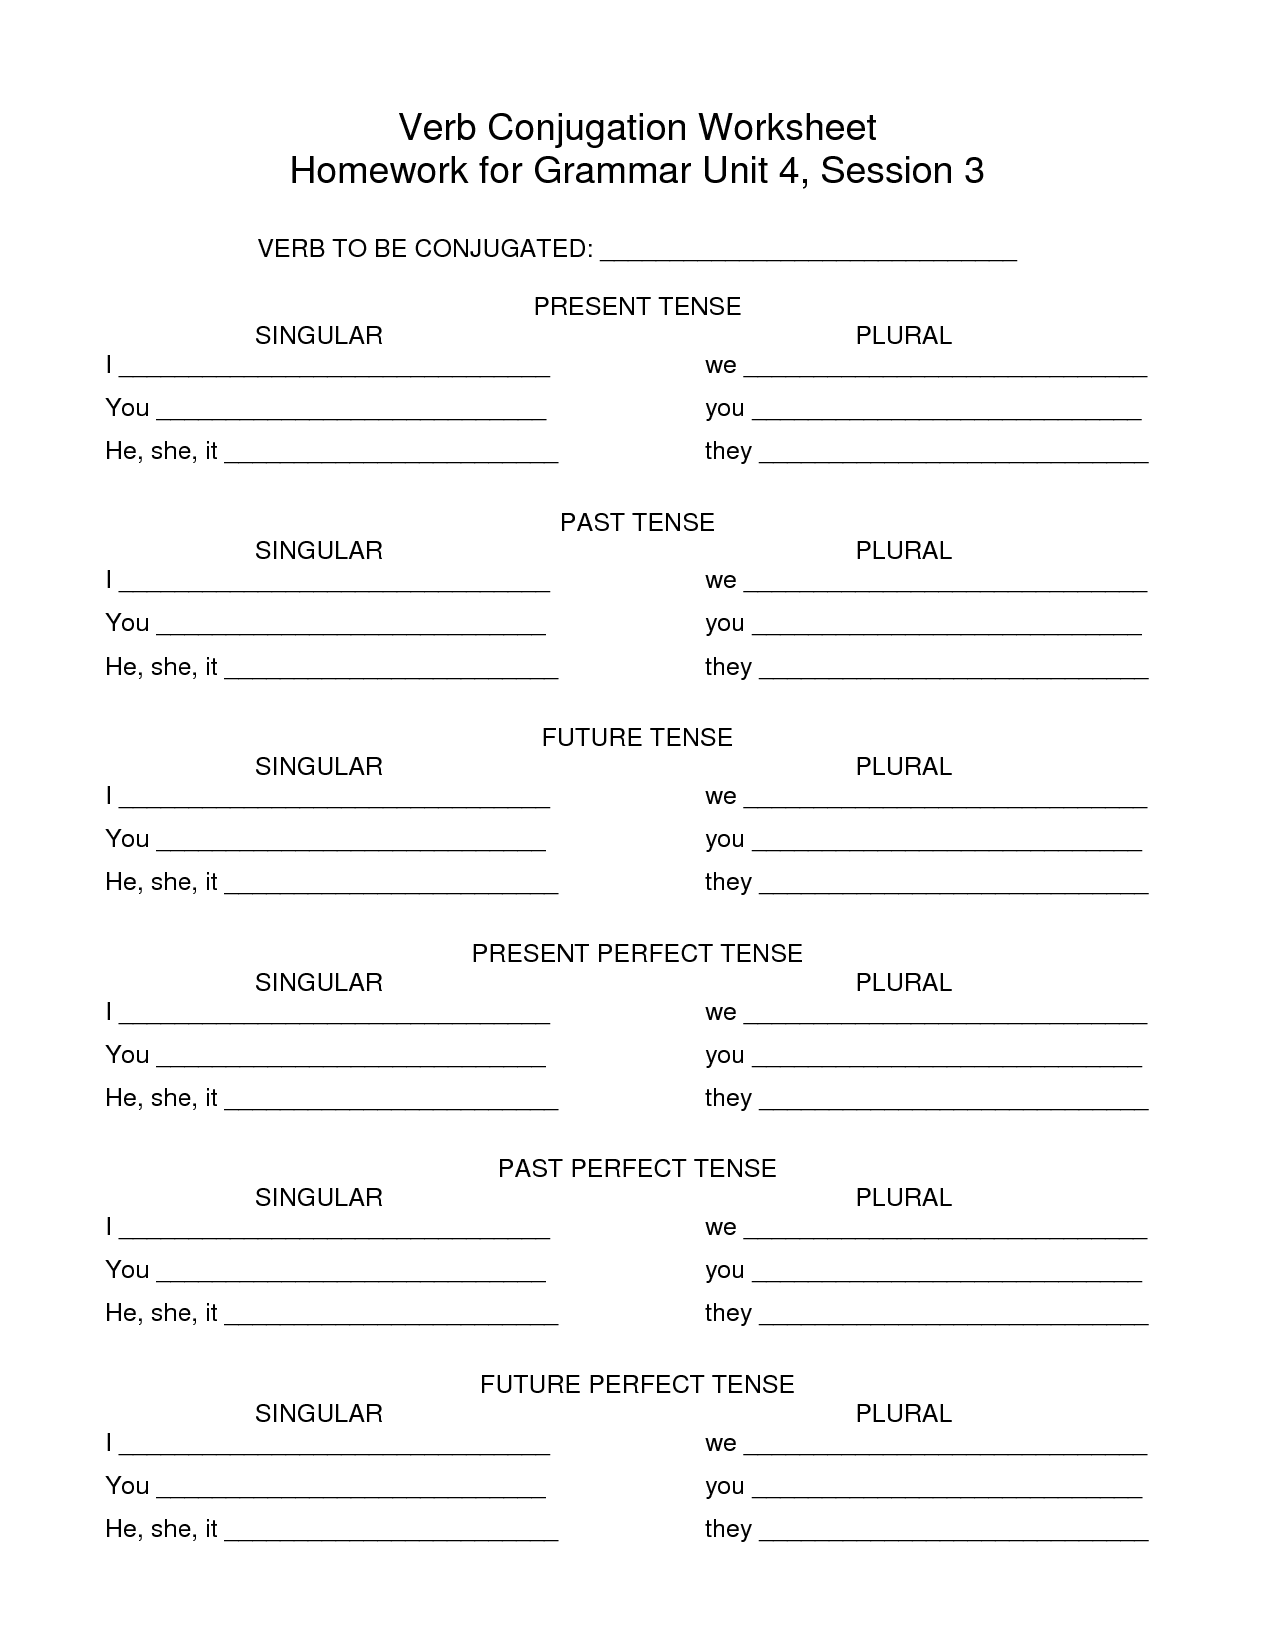 17-best-images-of-past-and-present-history-worksheets-past-present-and-future-tense-worksheets